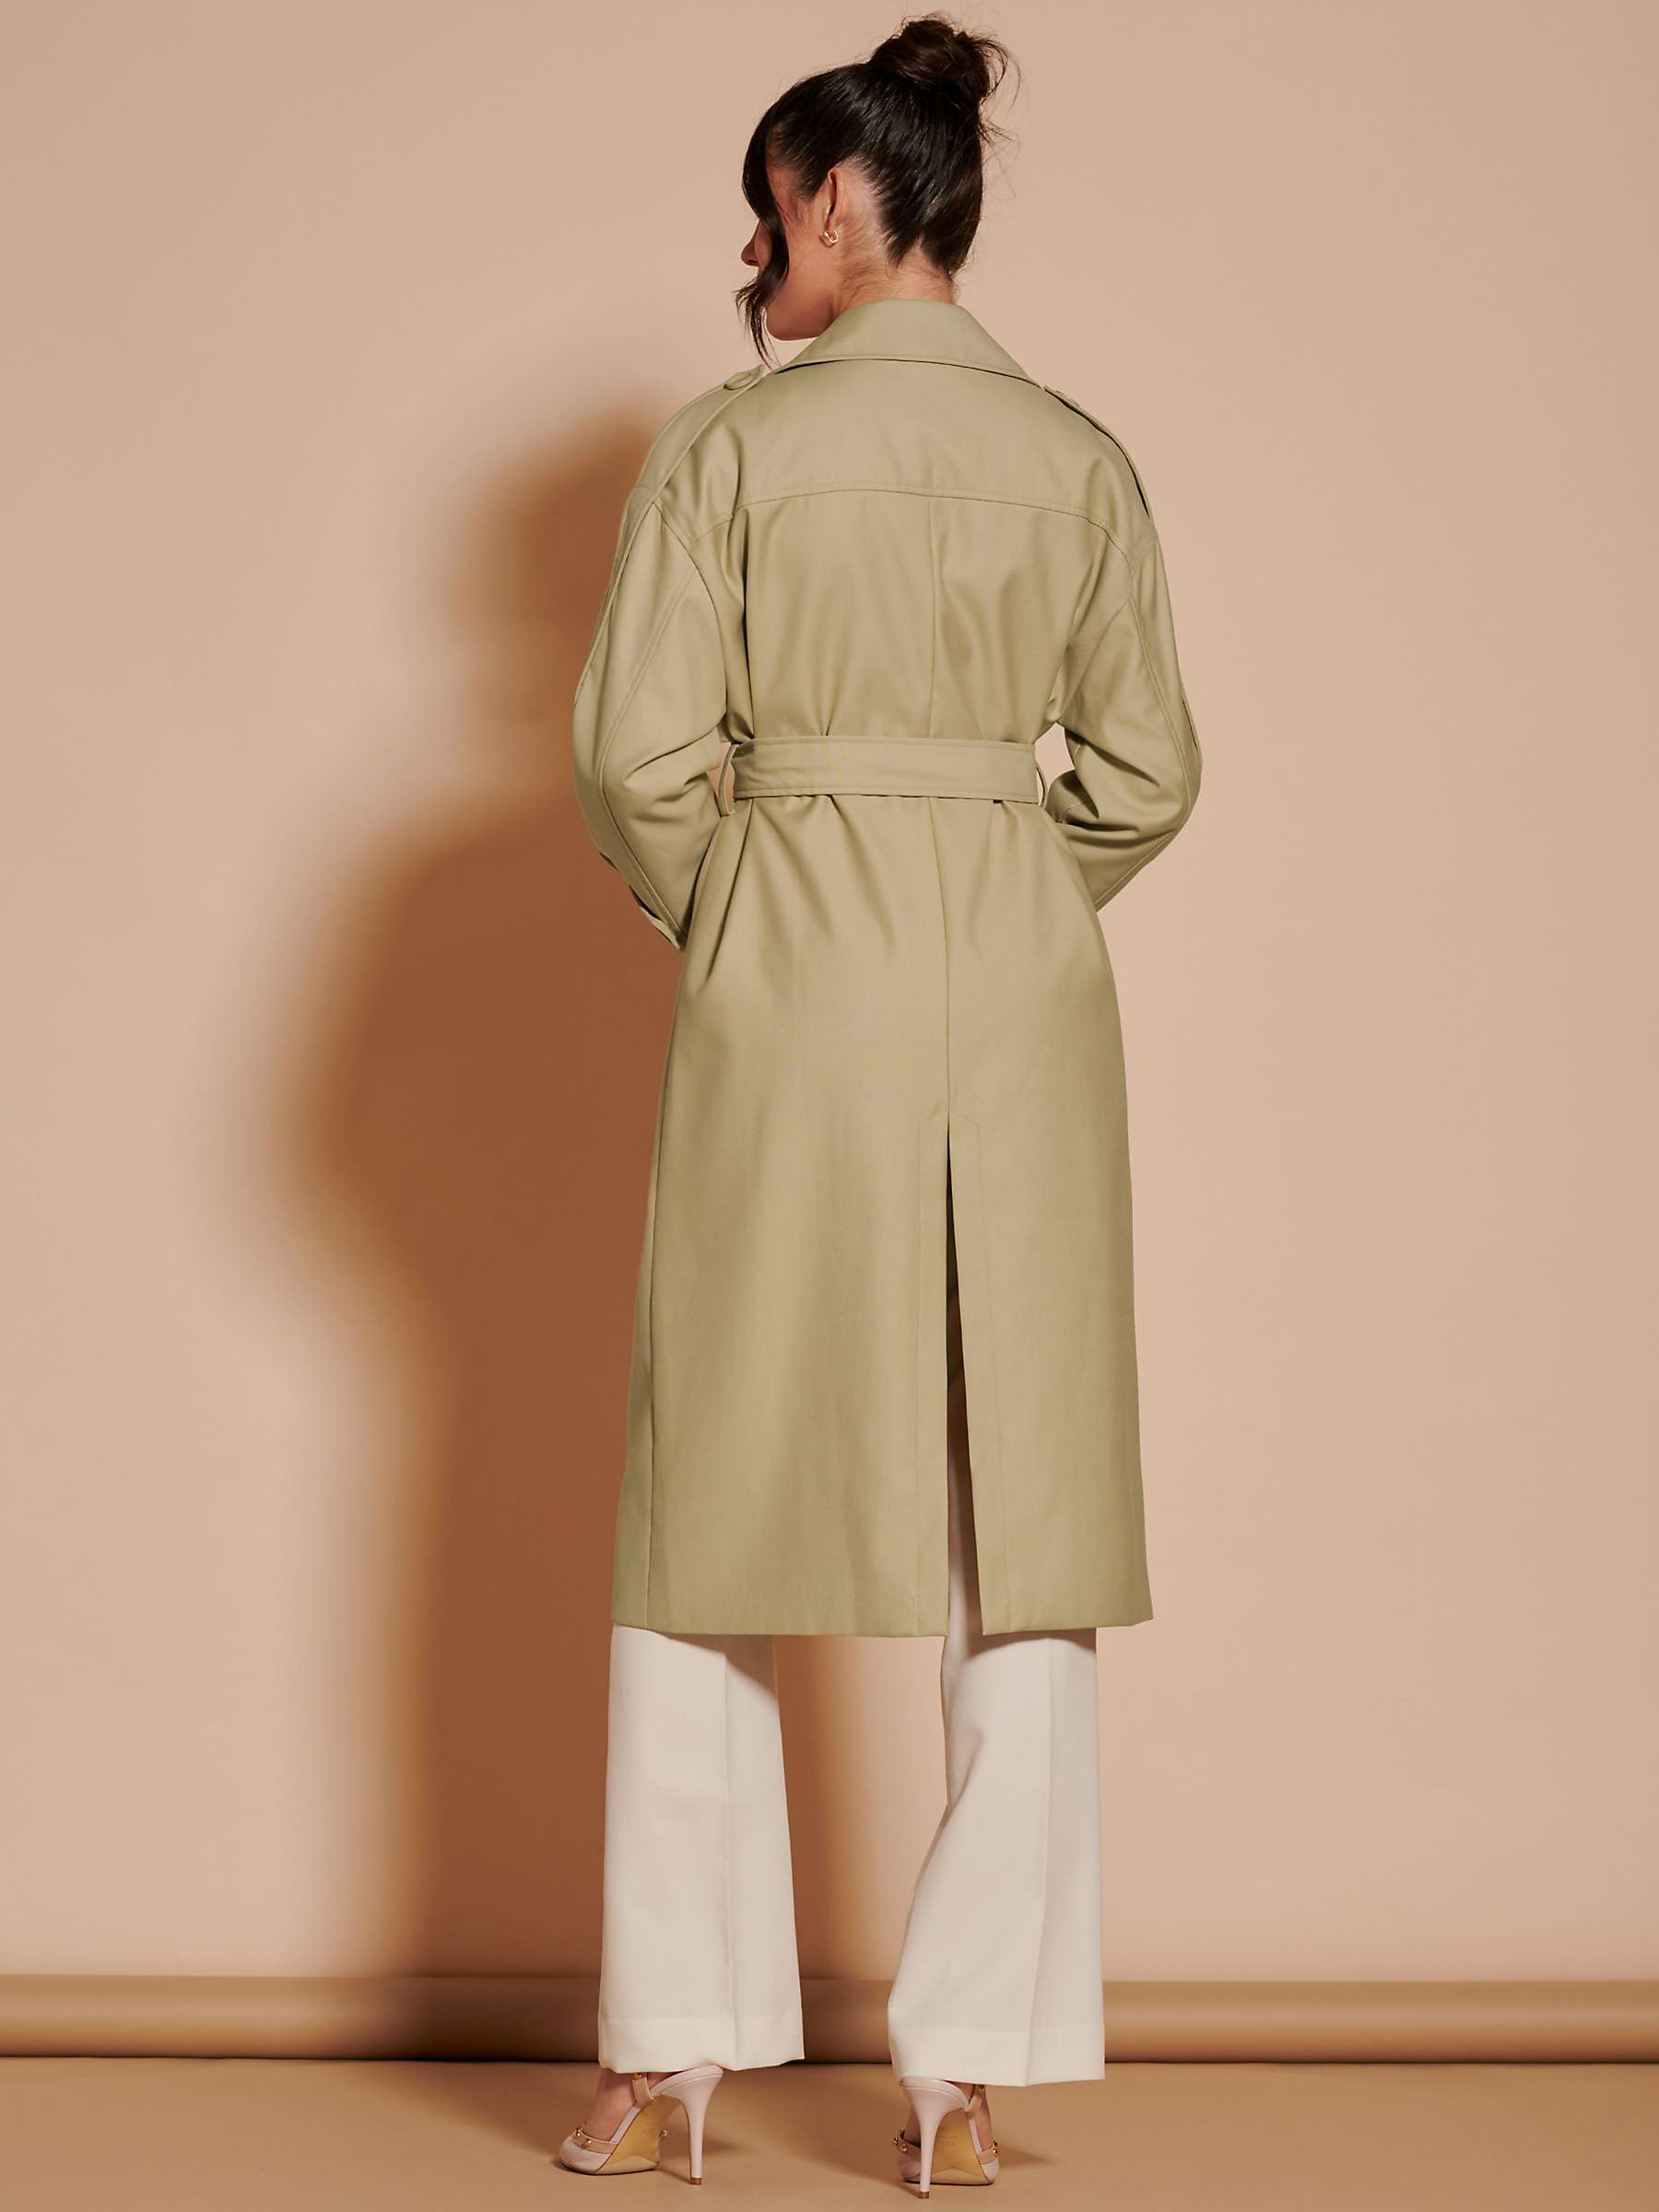 Buy Jolie Moi Double Breasted Trench Coat Online at johnlewis.com